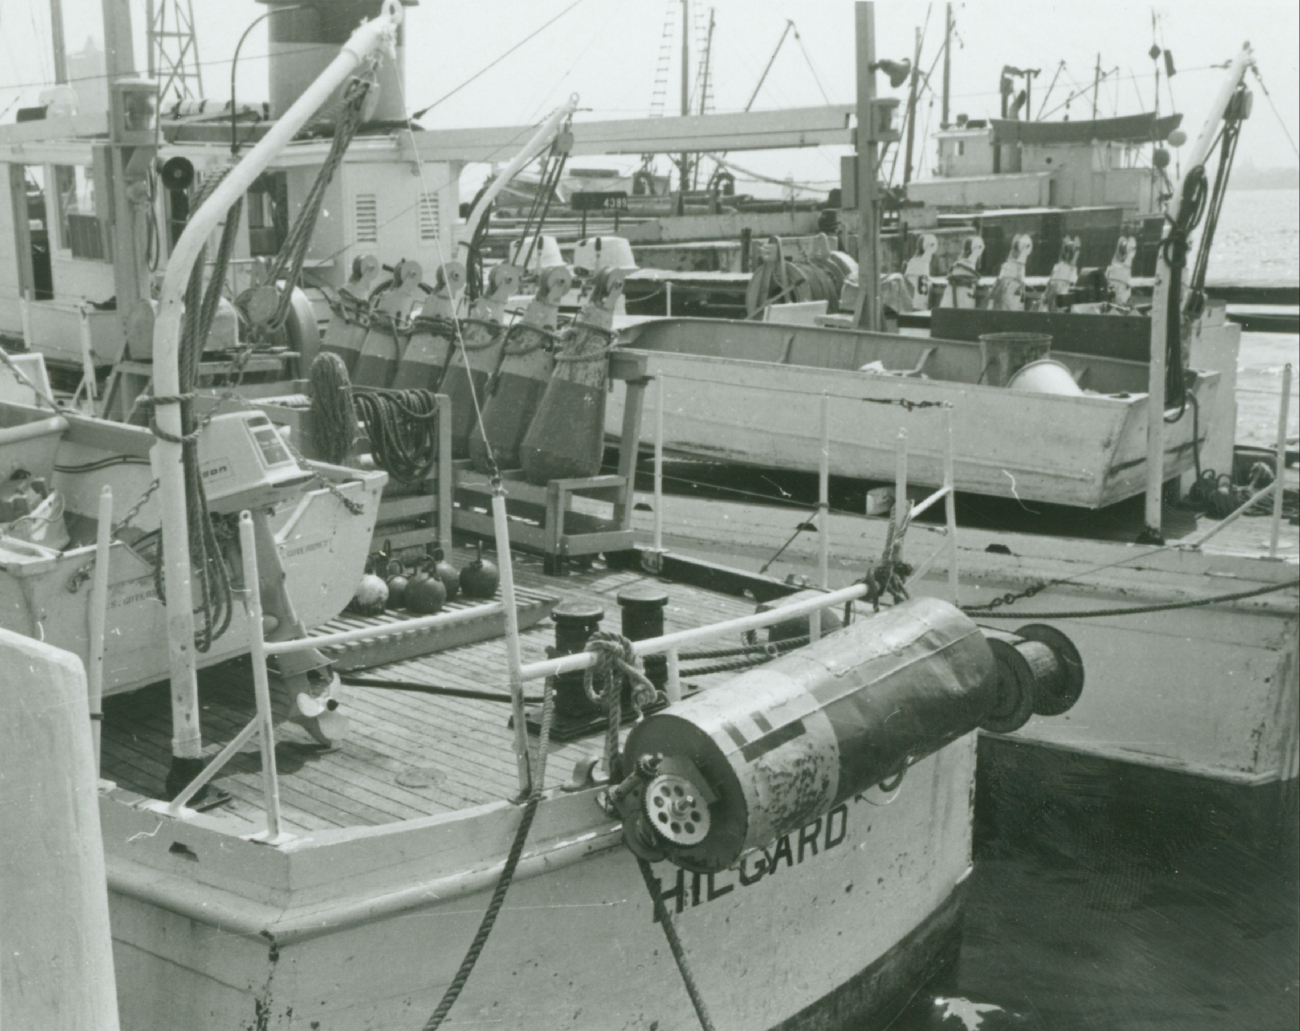 Stern of wiredrag vessel HILGARD with WAINWRIGHT tied up outboard